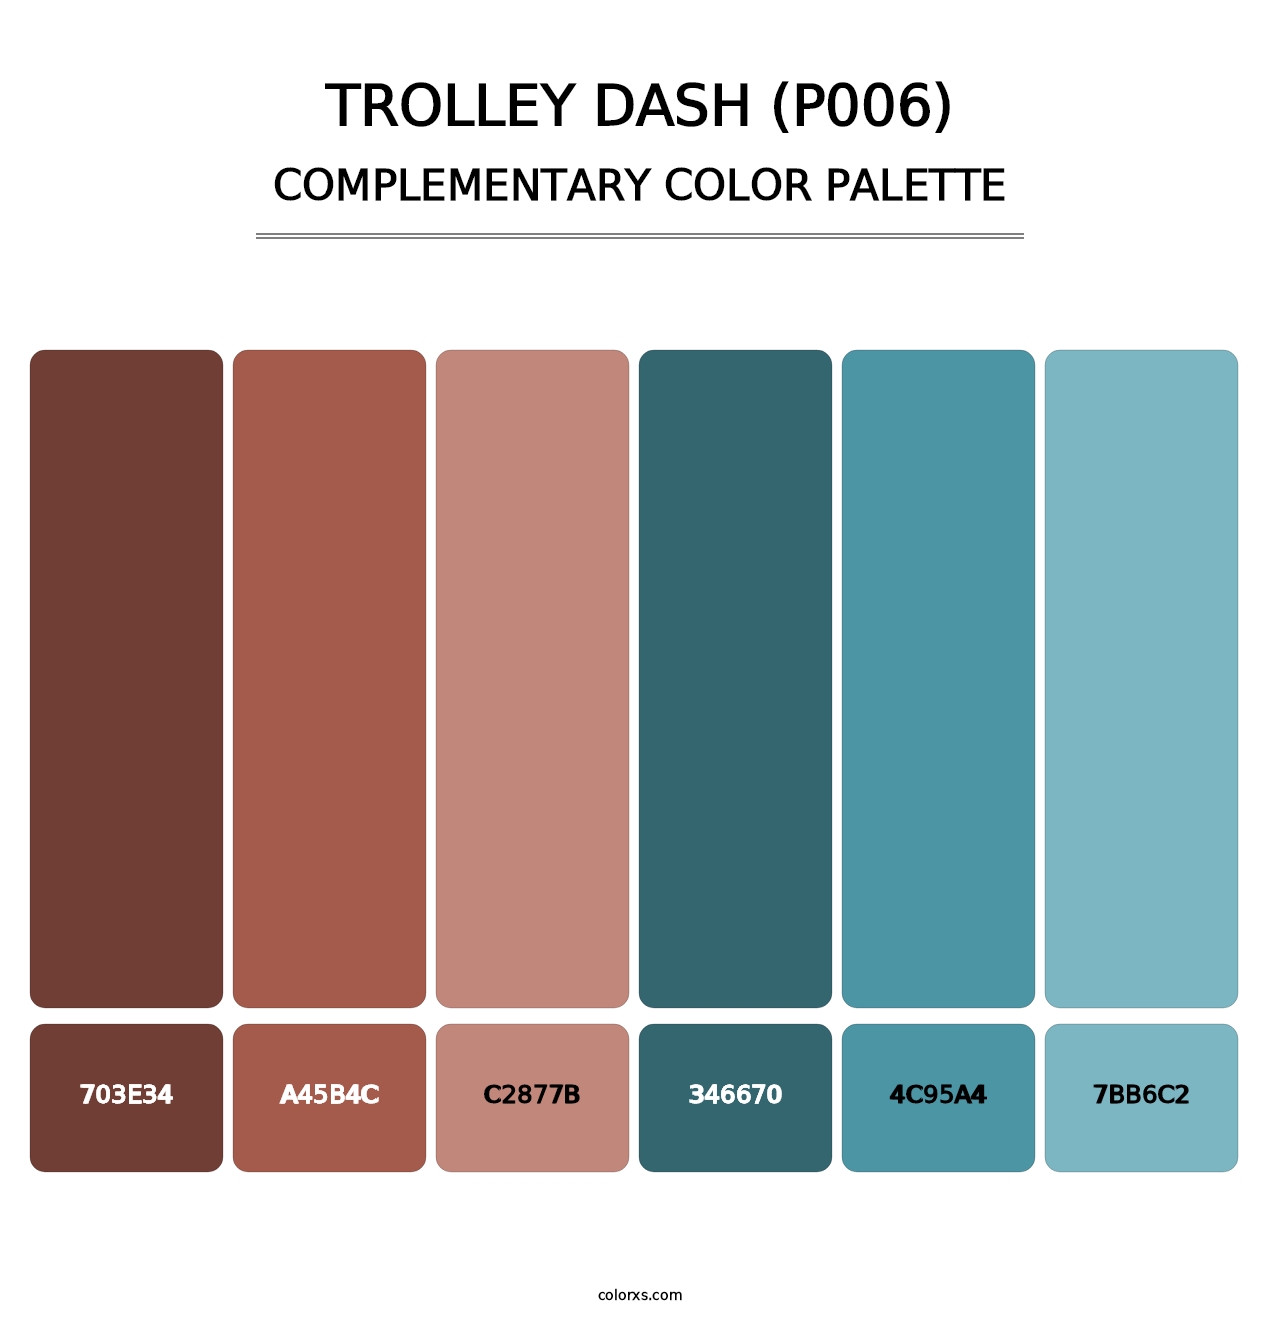 Trolley Dash (P006) - Complementary Color Palette